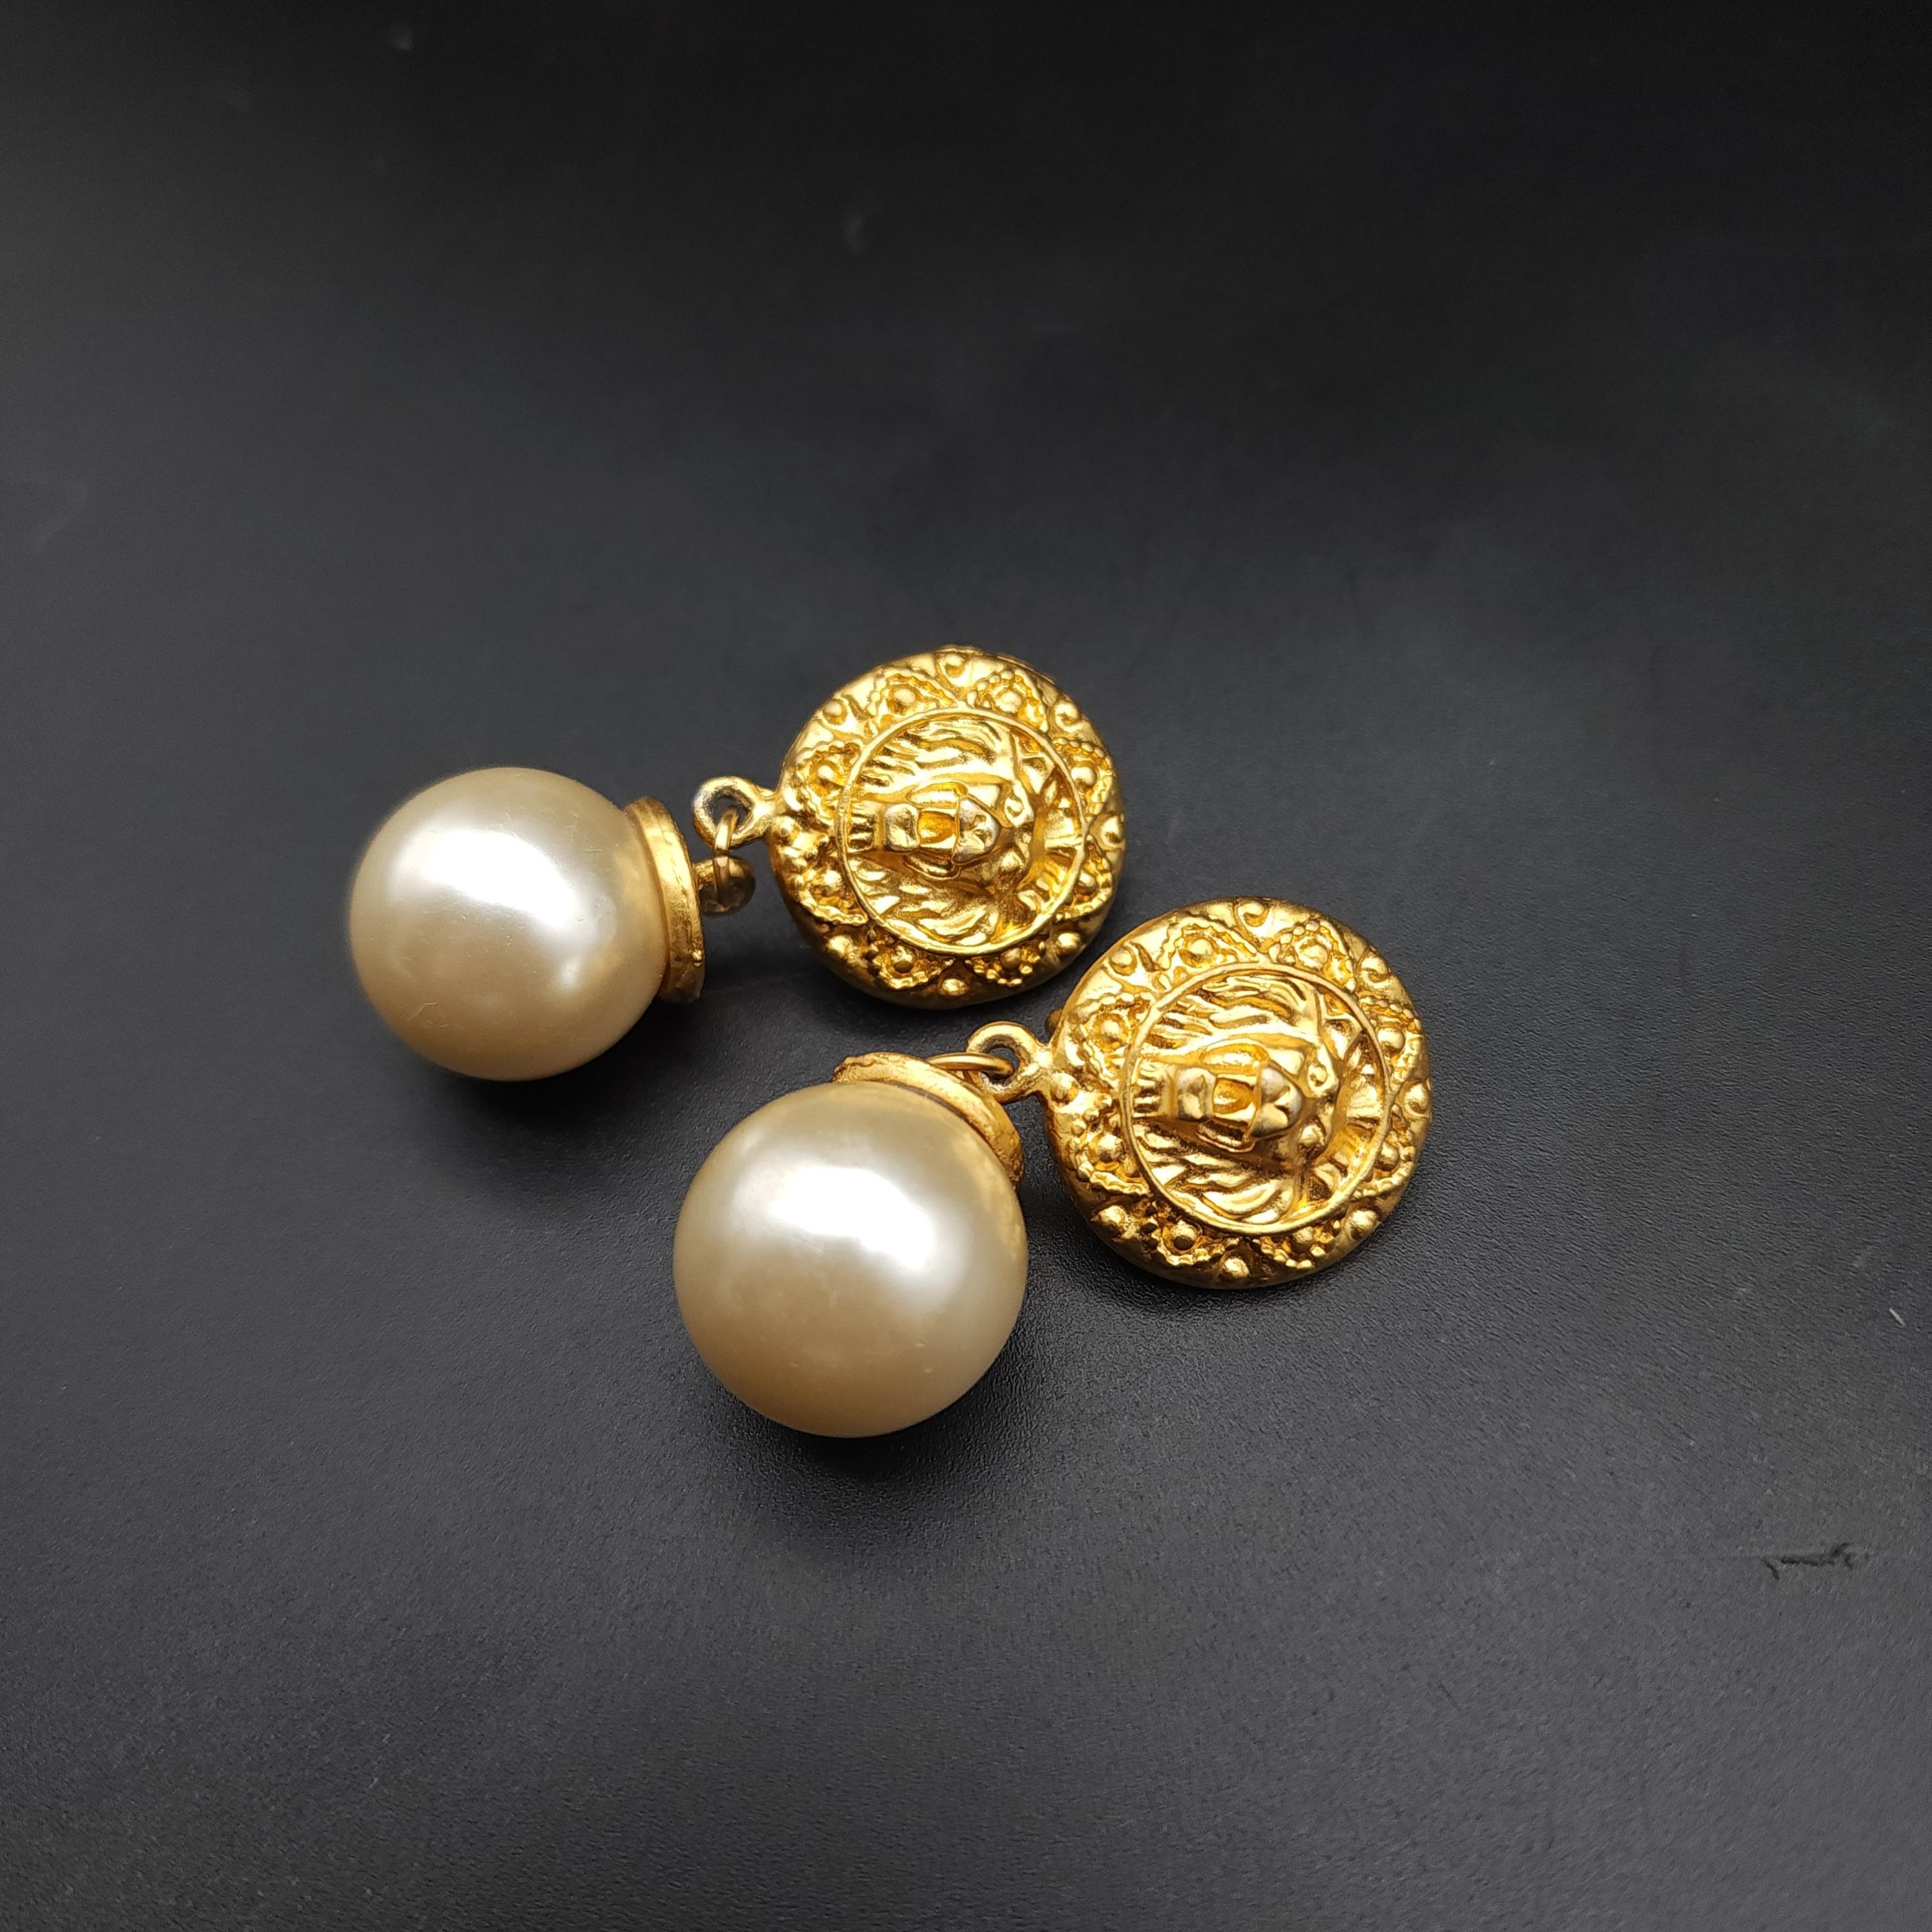 Dimensions: 5 cm x 2.3 cm each approx

Unleash the majesty of vintage style with the golden-tone lions head clips, featuring large, opulent faux pearls that dangle with regal elegance. These retro-inspired earrings showcase a bold lions head motif,